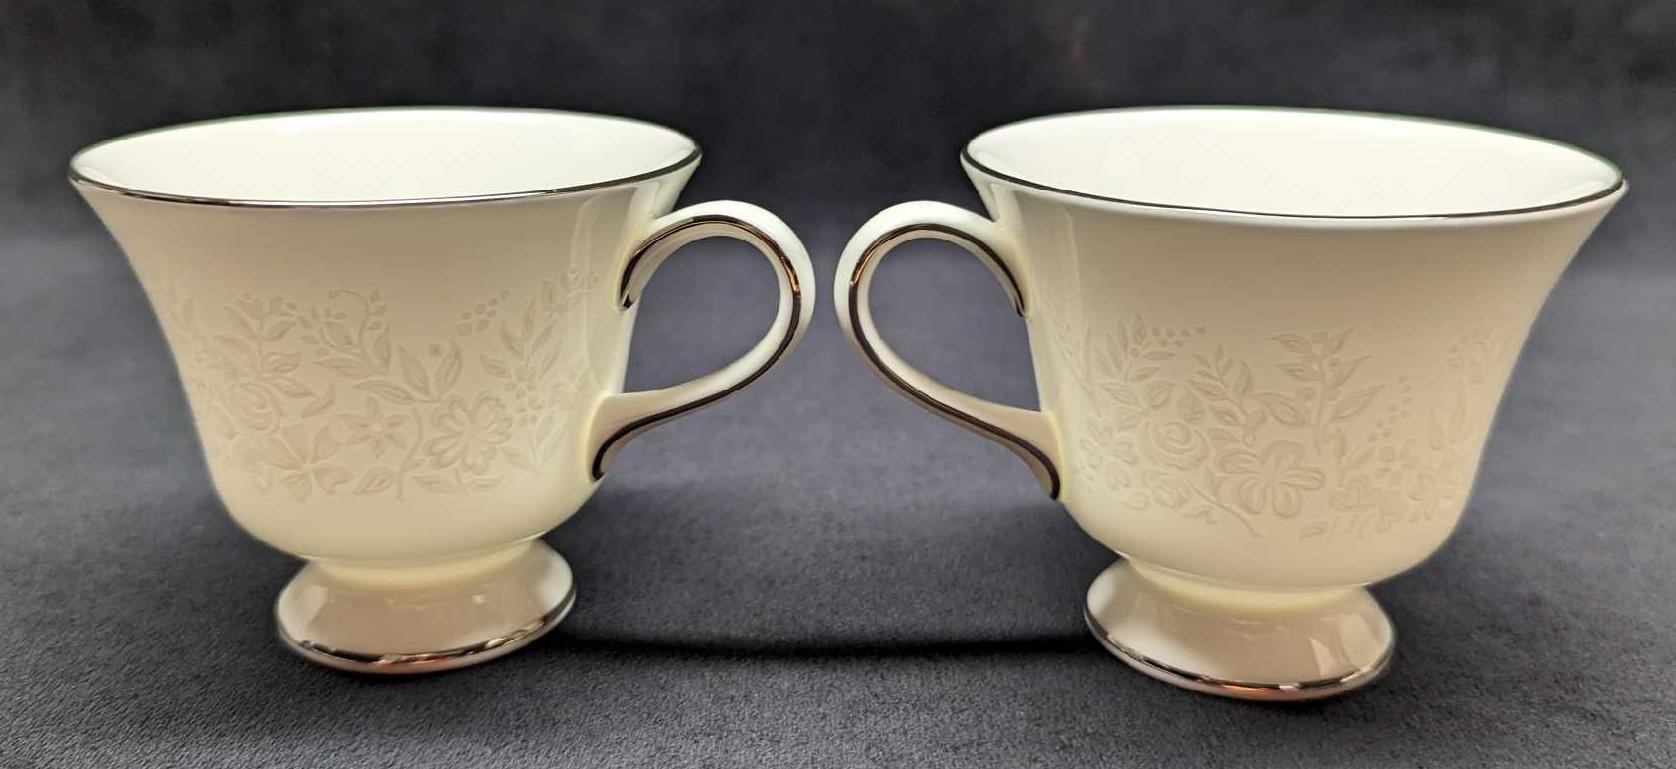 2 Wedgwood China Silver Ermine Contour Footed Cups